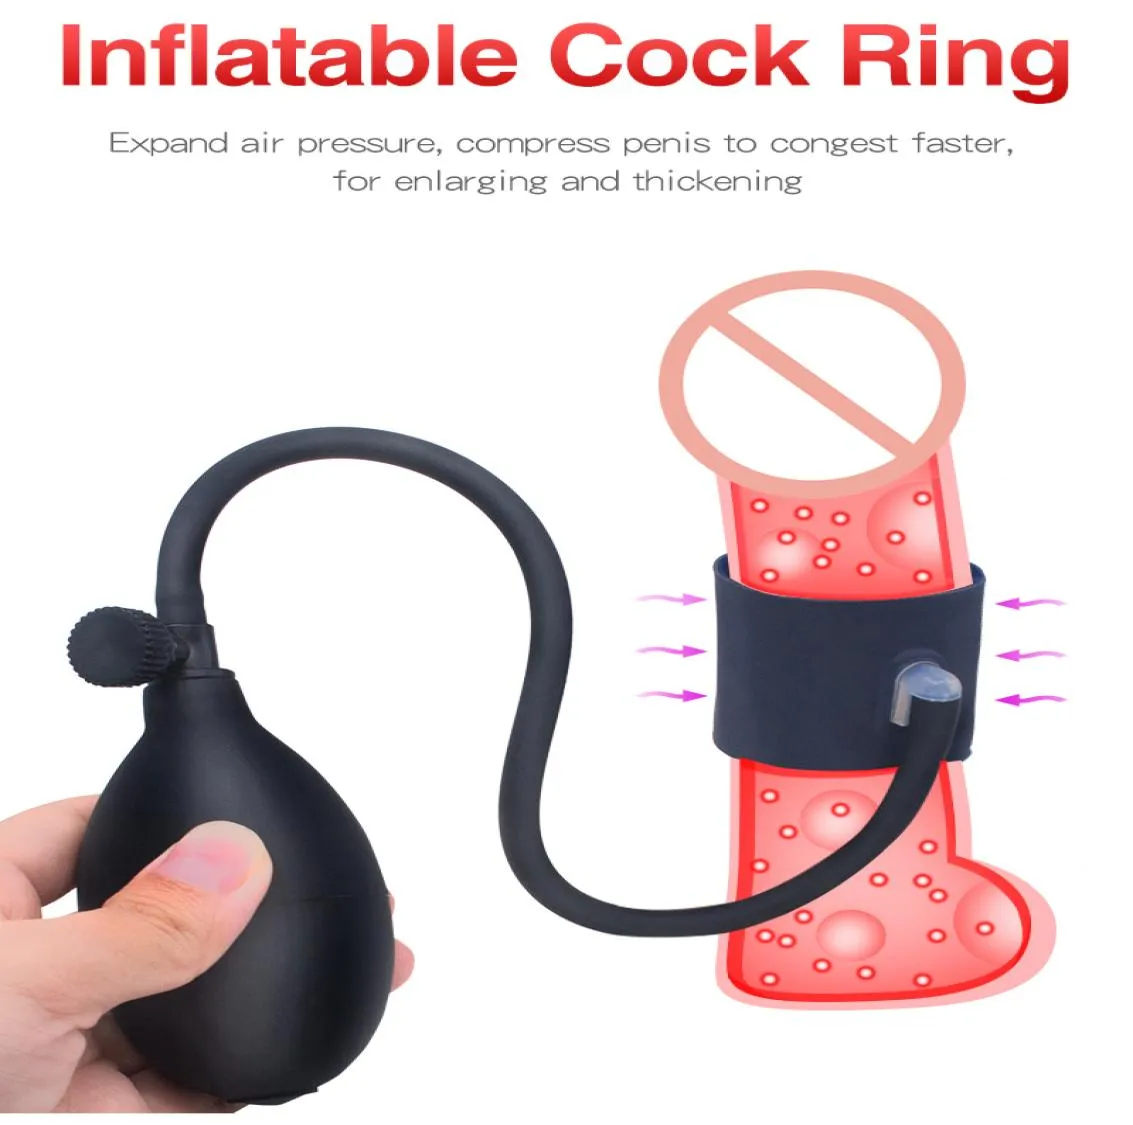 Inflatable Ring For Penis Sex Toys Extender Sleeve For Penis Extension Head Massager Sex Cock Ring Penis Exerciser Devices3084015